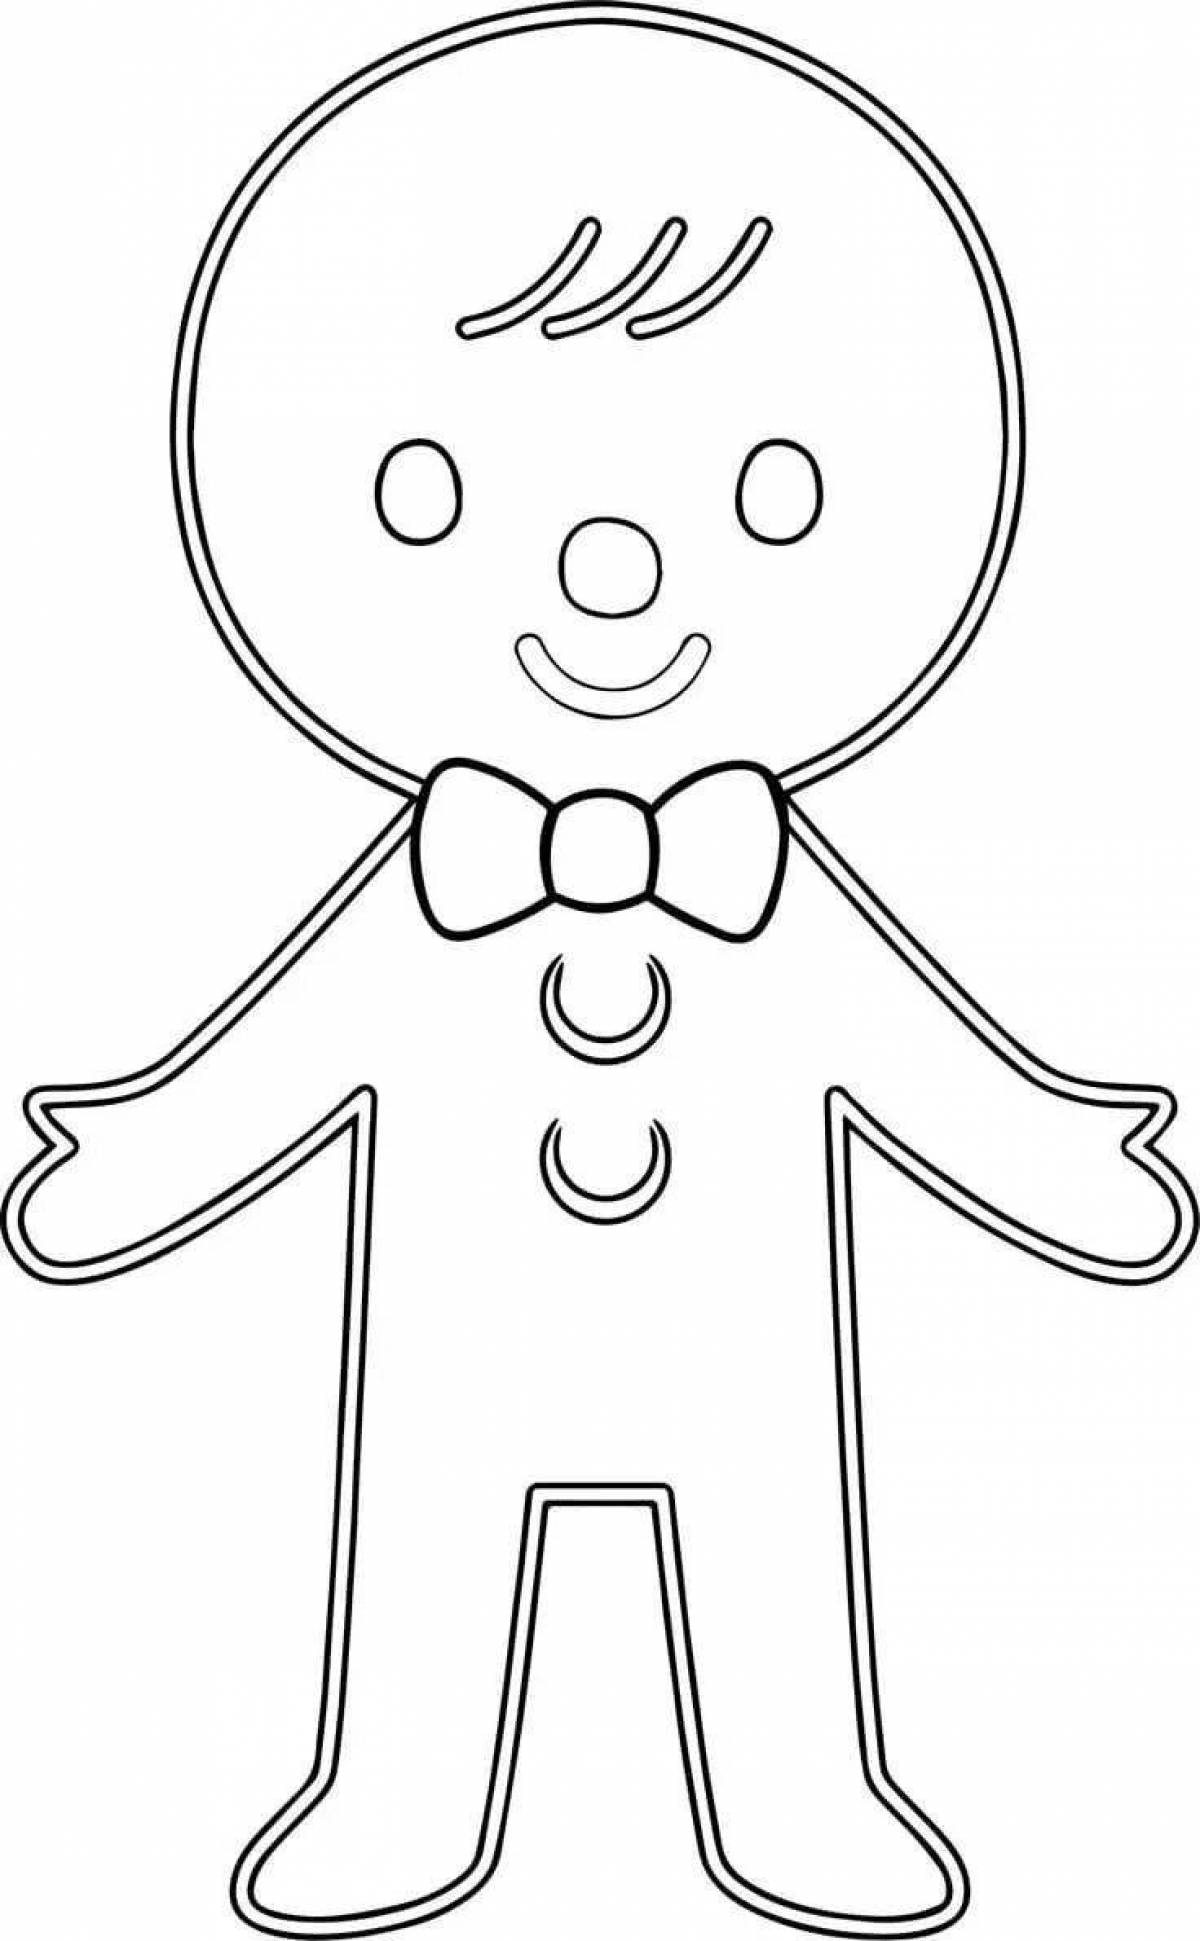 Coloring fairy gingerbread man